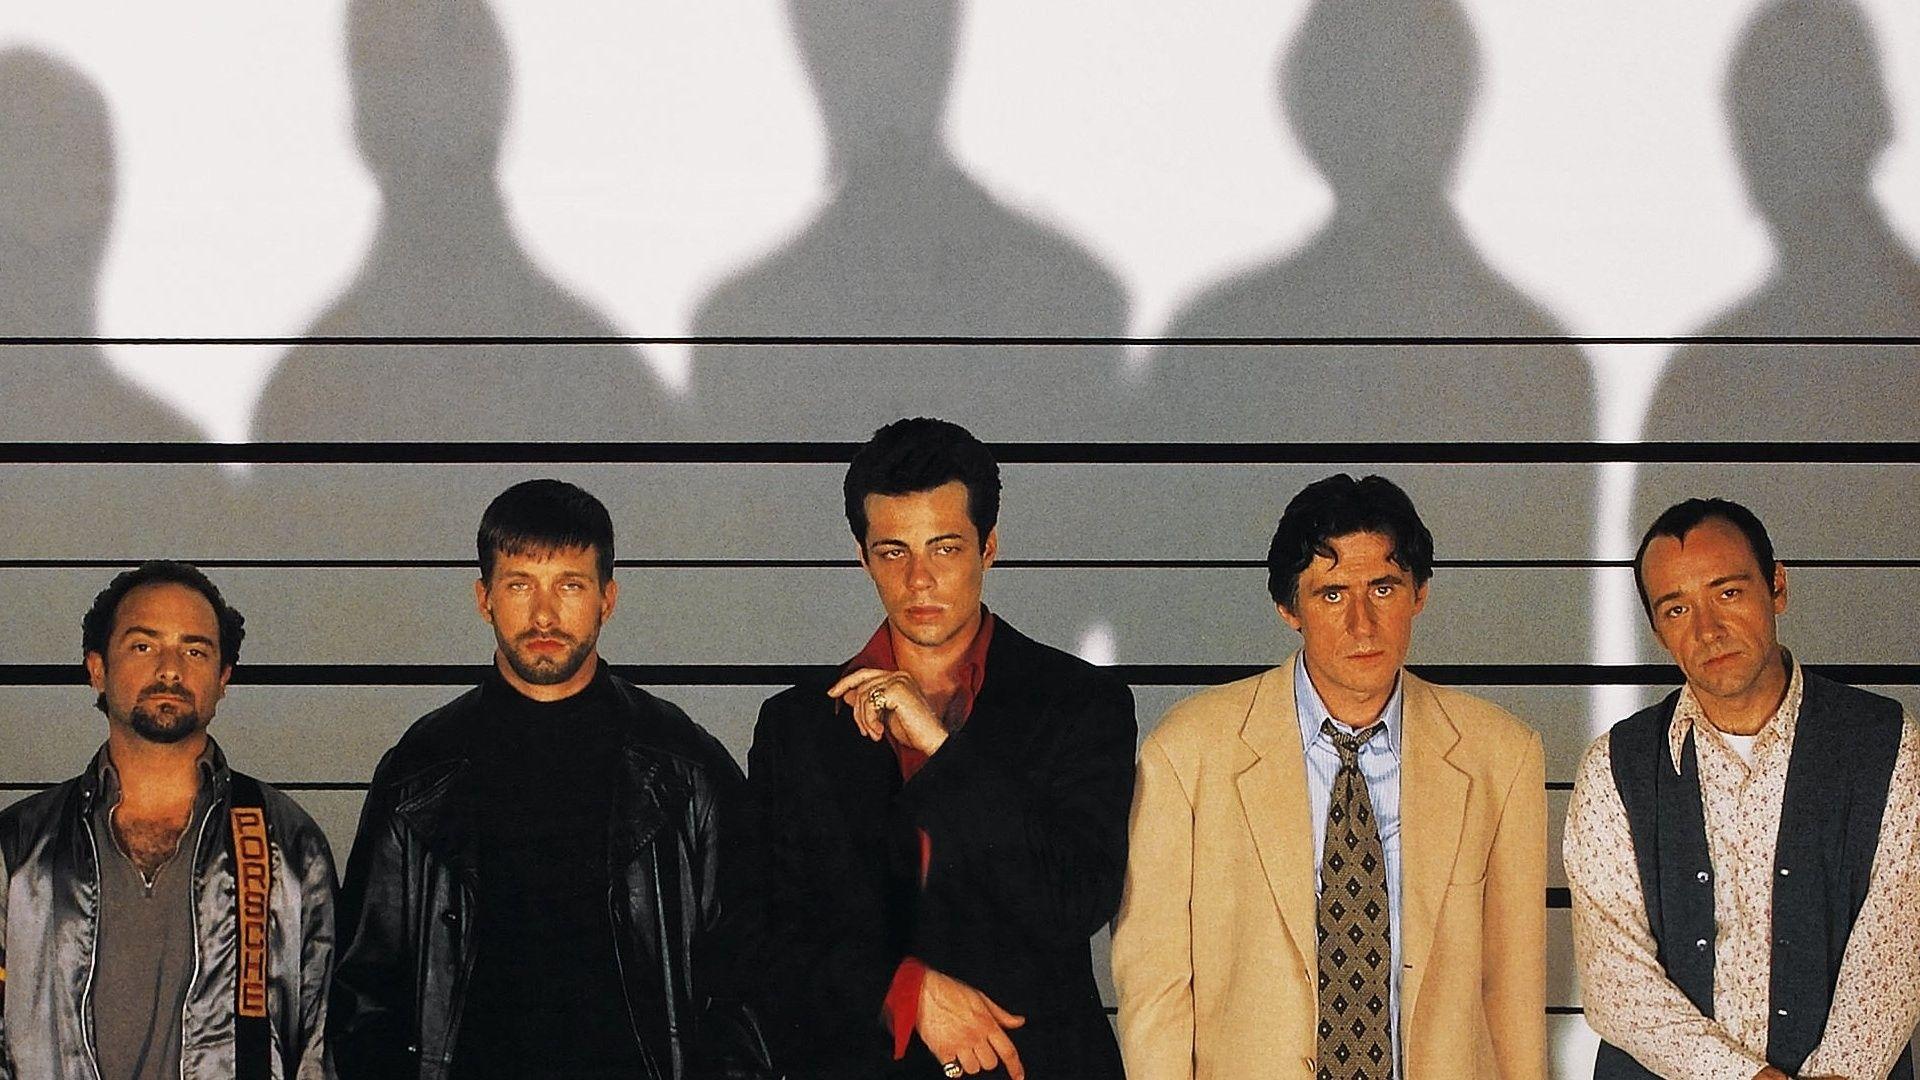 Download Wallpaper 1920x1080 Usual suspects, Faces, Mans, People